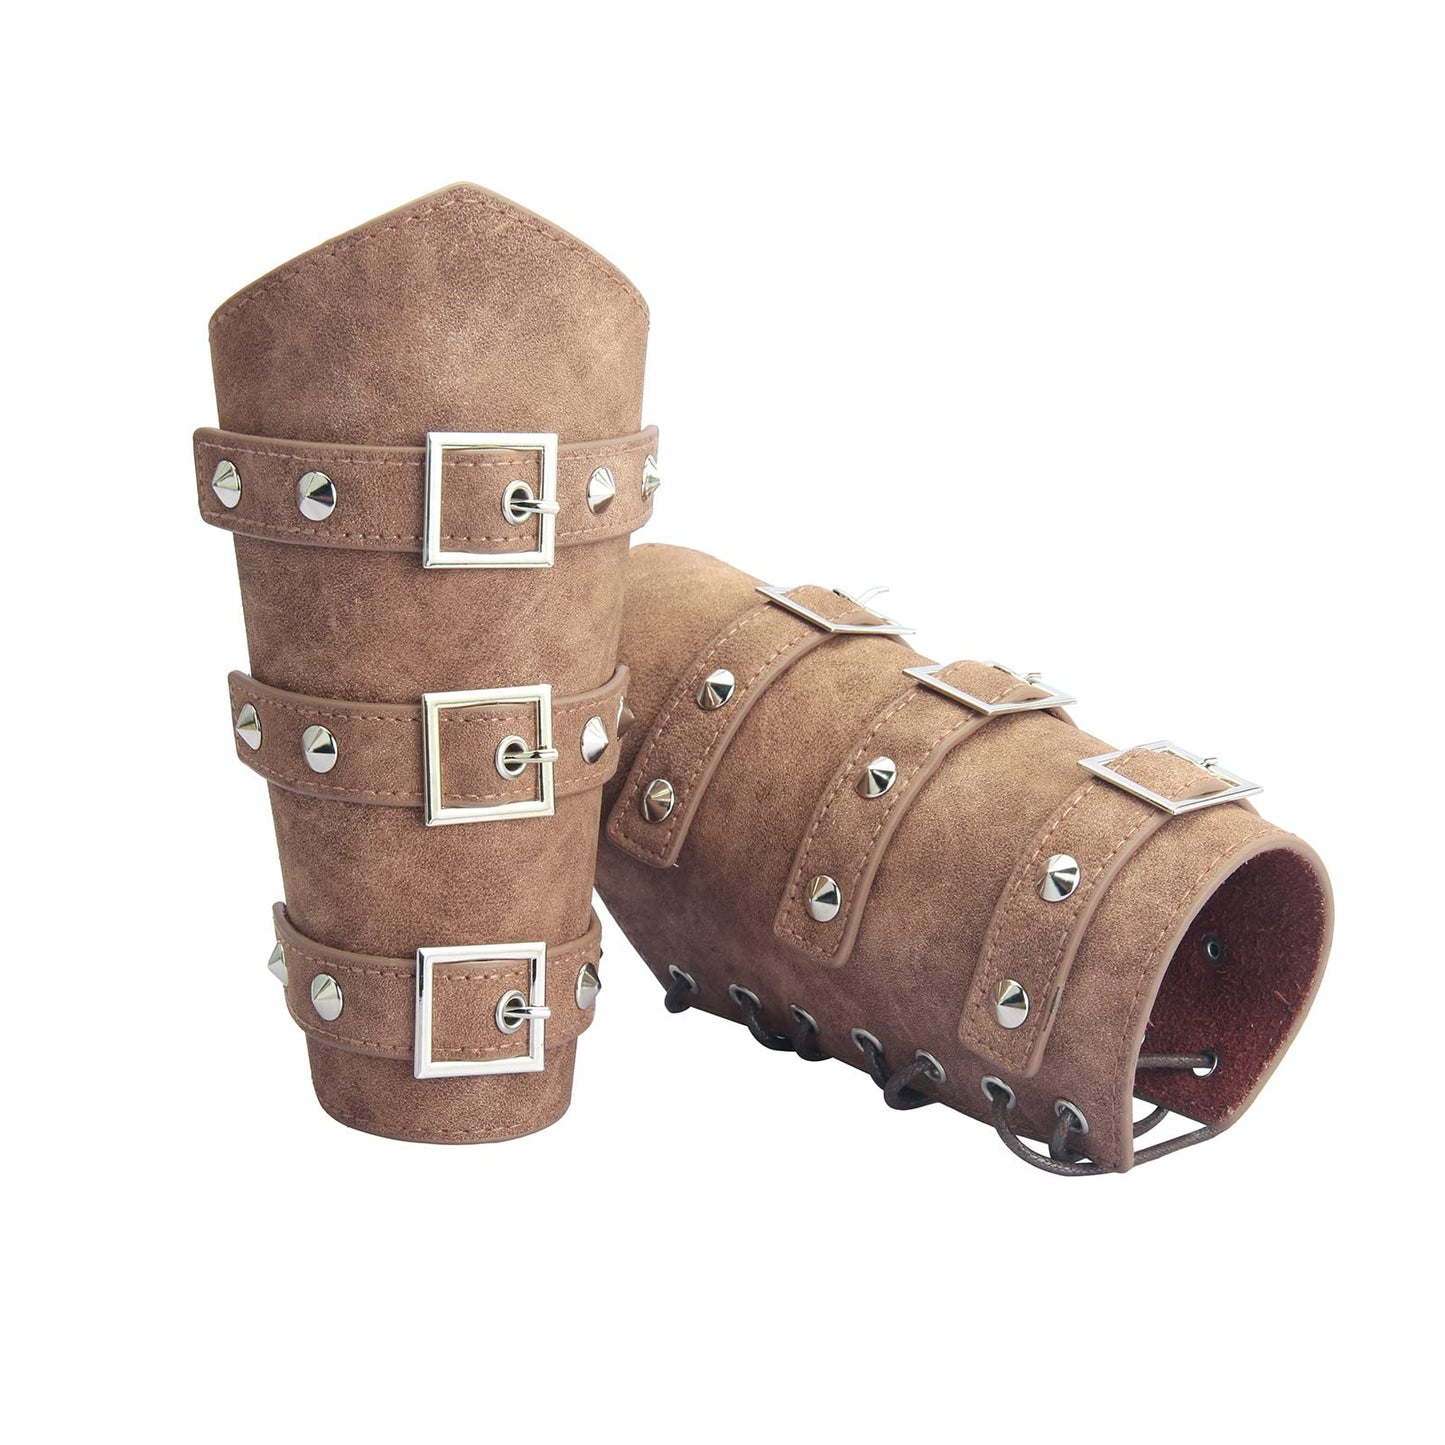 GelConnie Leather Gauntlet Wristband Armor Bracers